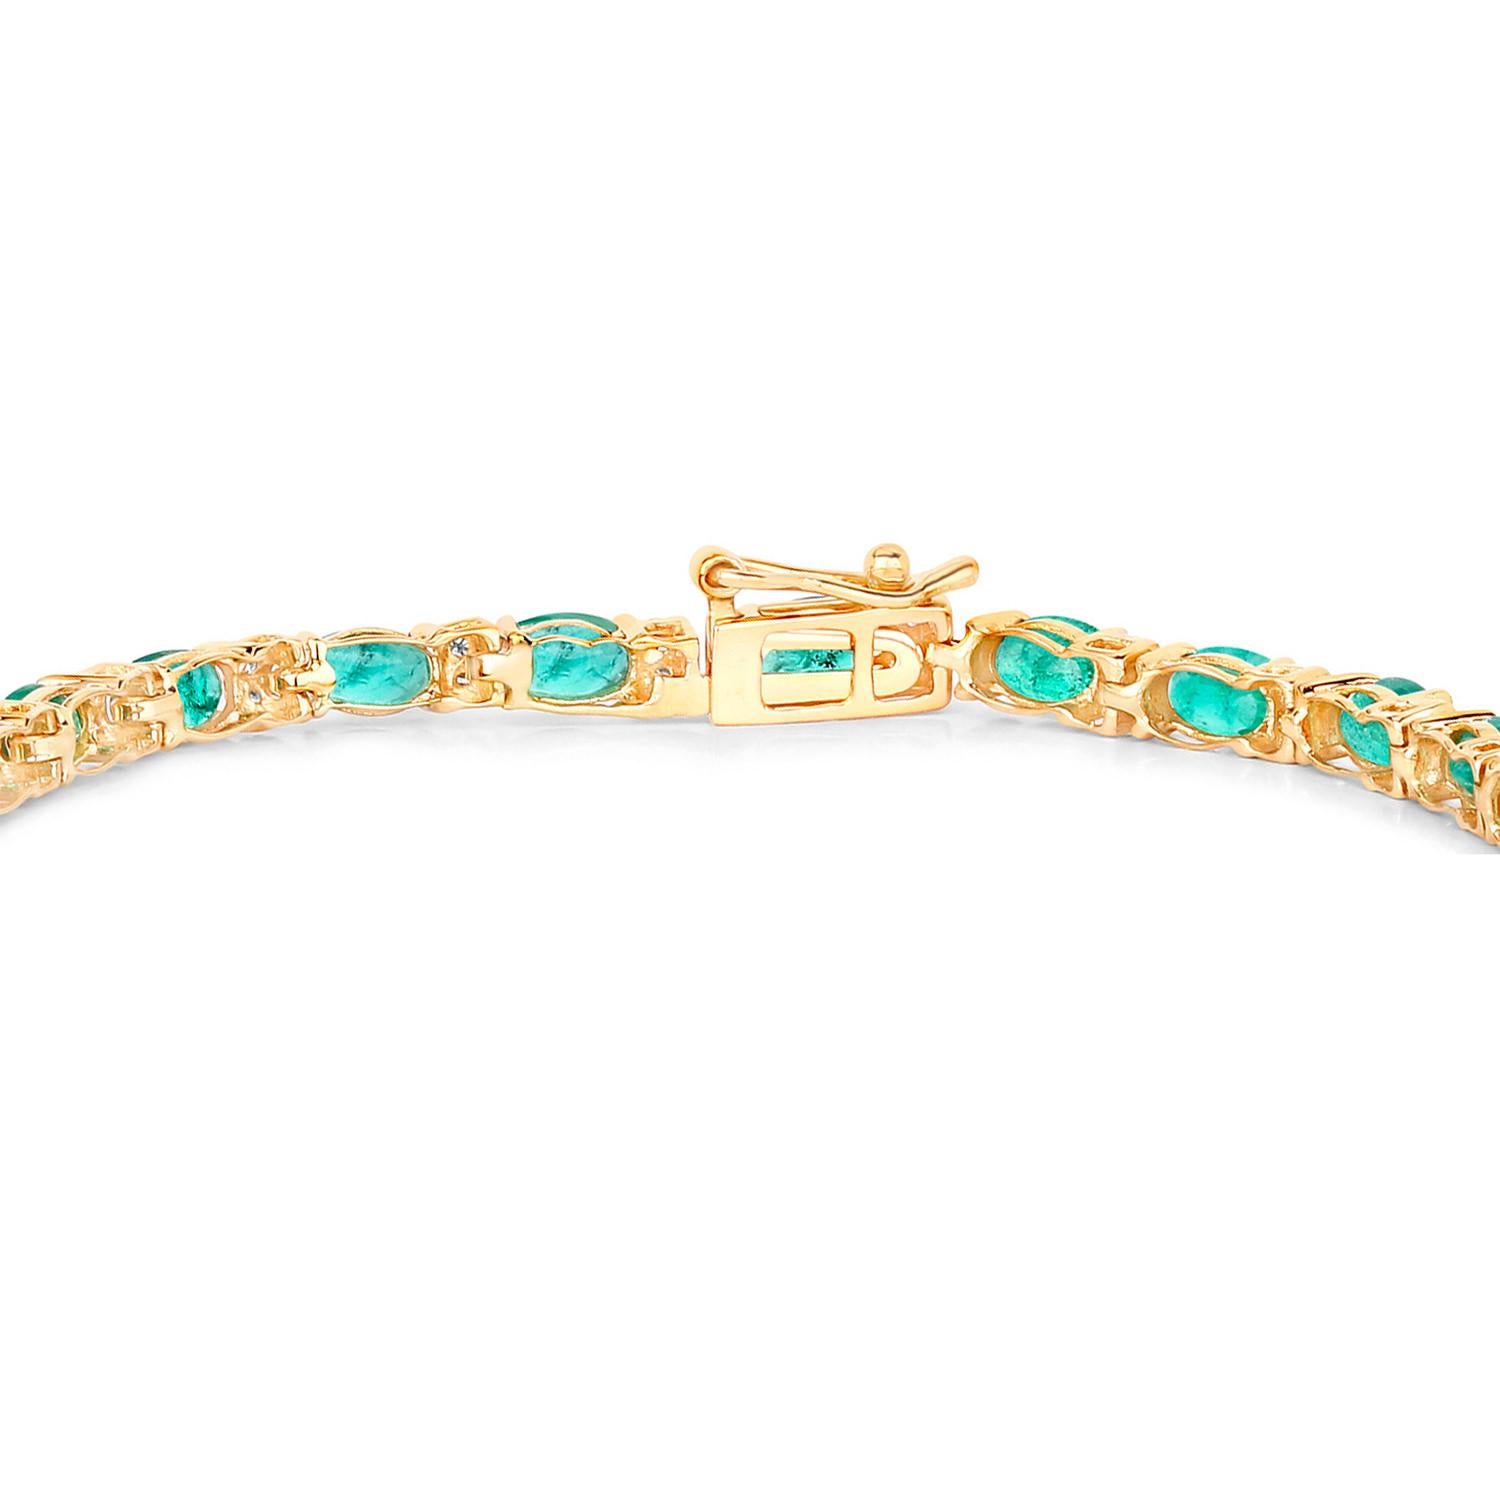 Natural Zambian Emerald Tennis Bracelet Diamond Links 5 Carats 14K Yellow Gold In Excellent Condition For Sale In Laguna Niguel, CA